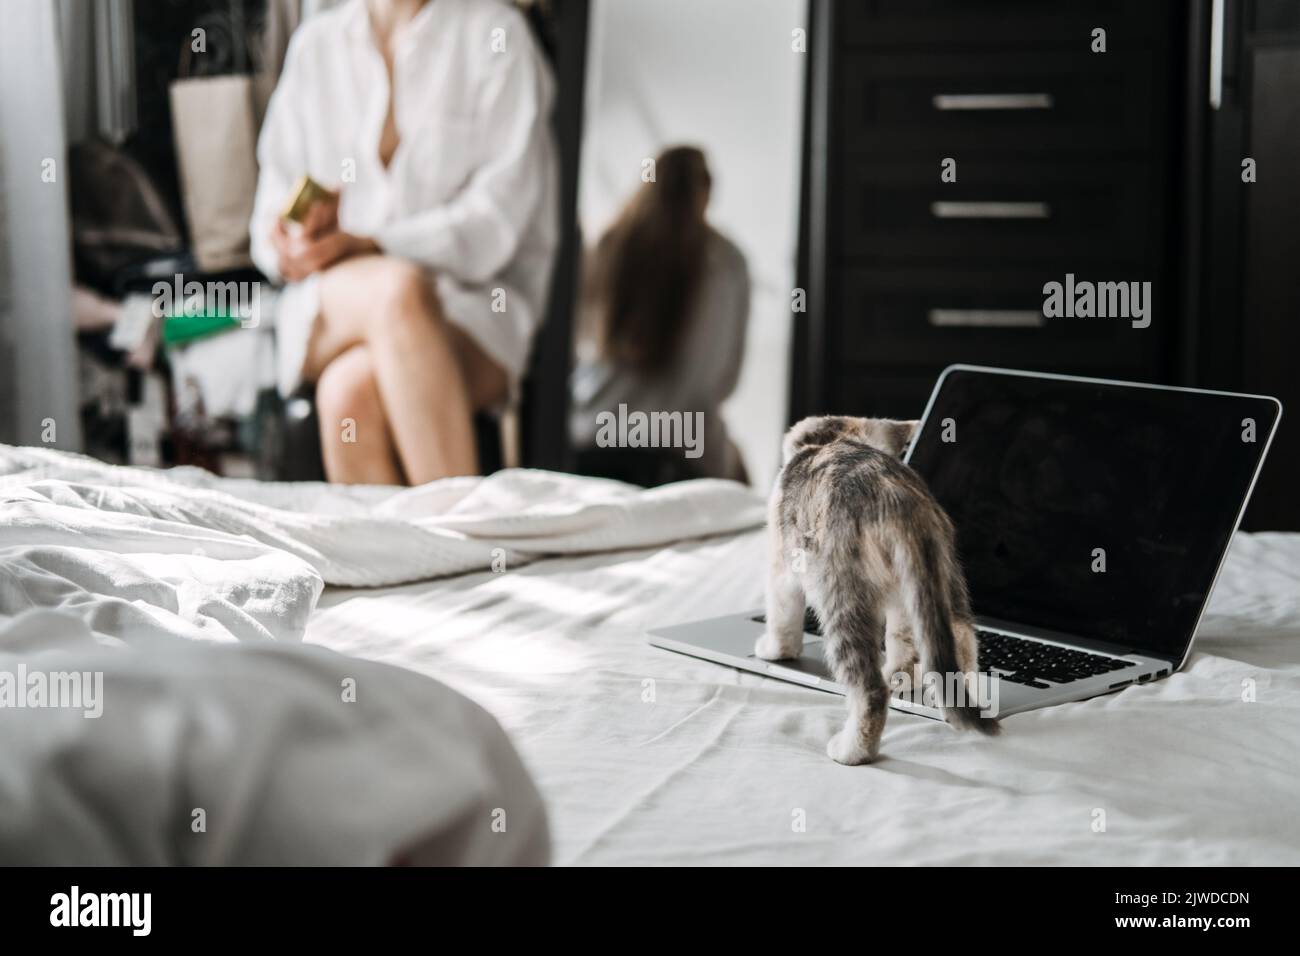 Self care, Mental health, mental wellbeing, calm, mourning routines, start day. No stress. Young woman in pajamas doing morning routines with little Stock Photo